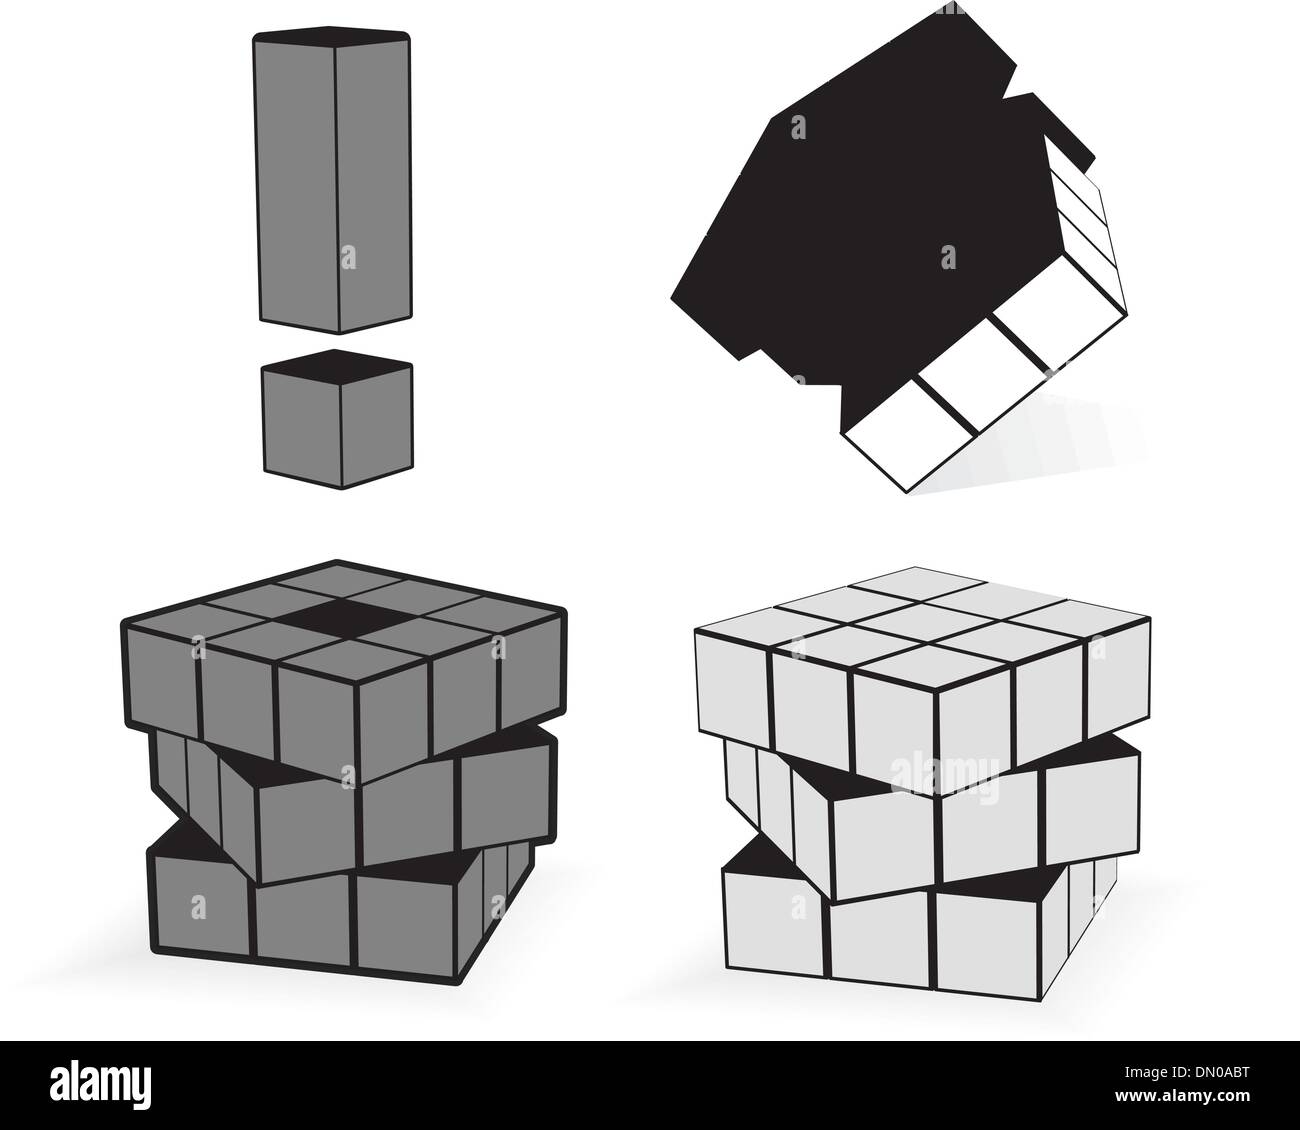 The Cube In Three Variation Stock Vector